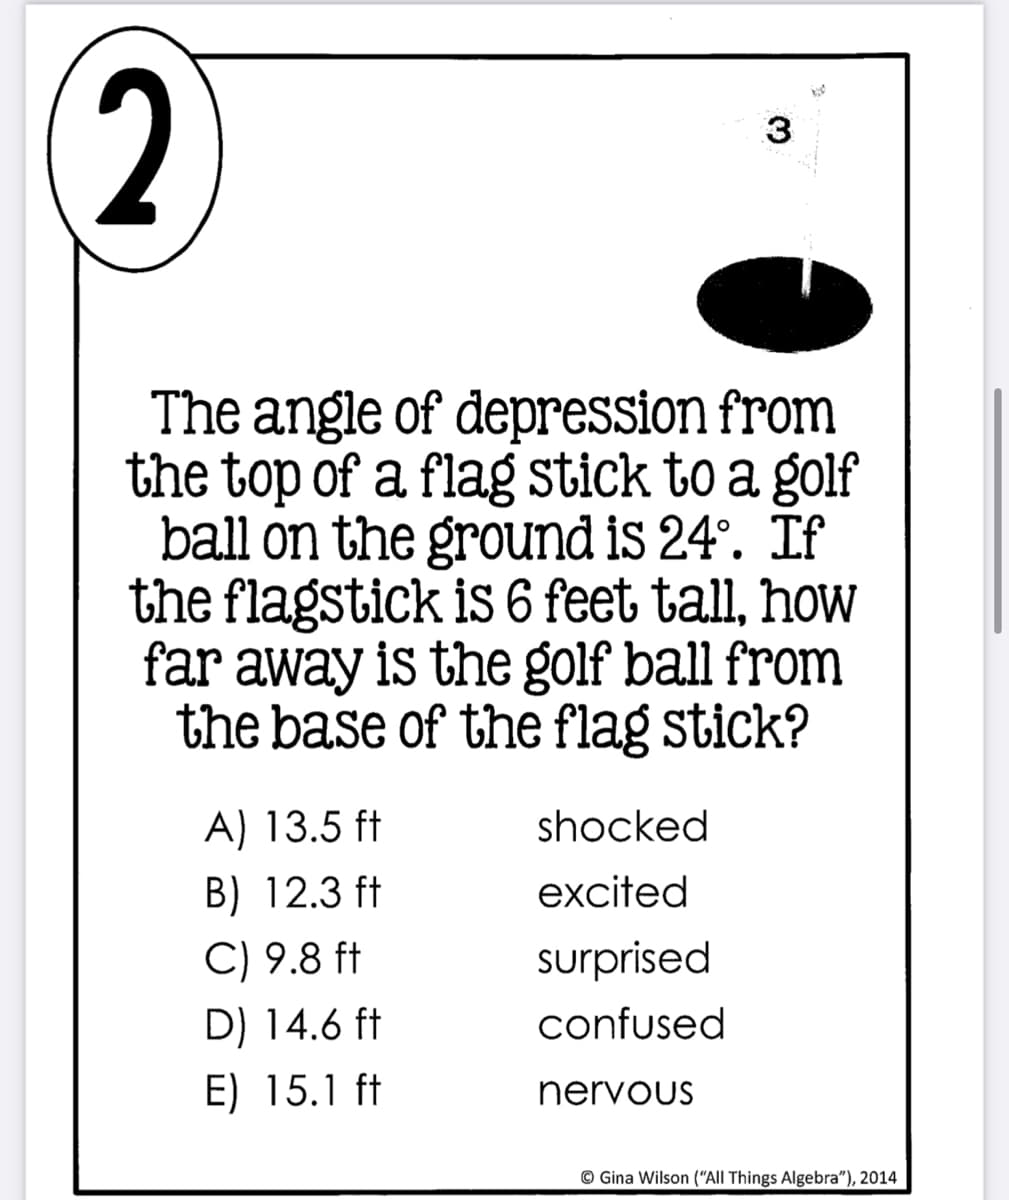 2
The angle of depression from
the top of a flag stick to a golf
ball on the ground is 24°. If
the flagstick is 6 feet tall, how
far away is the golf ball from
the base of the flag stick?
A) 13.5 ft
shocked
B) 12.3 ft
excited
C) 9.8 ft
surprised
D) 14.6 ft
confused
E) 15.1 ft
nervous
© Gina Wilson ("All Things Algebra"), 2014
